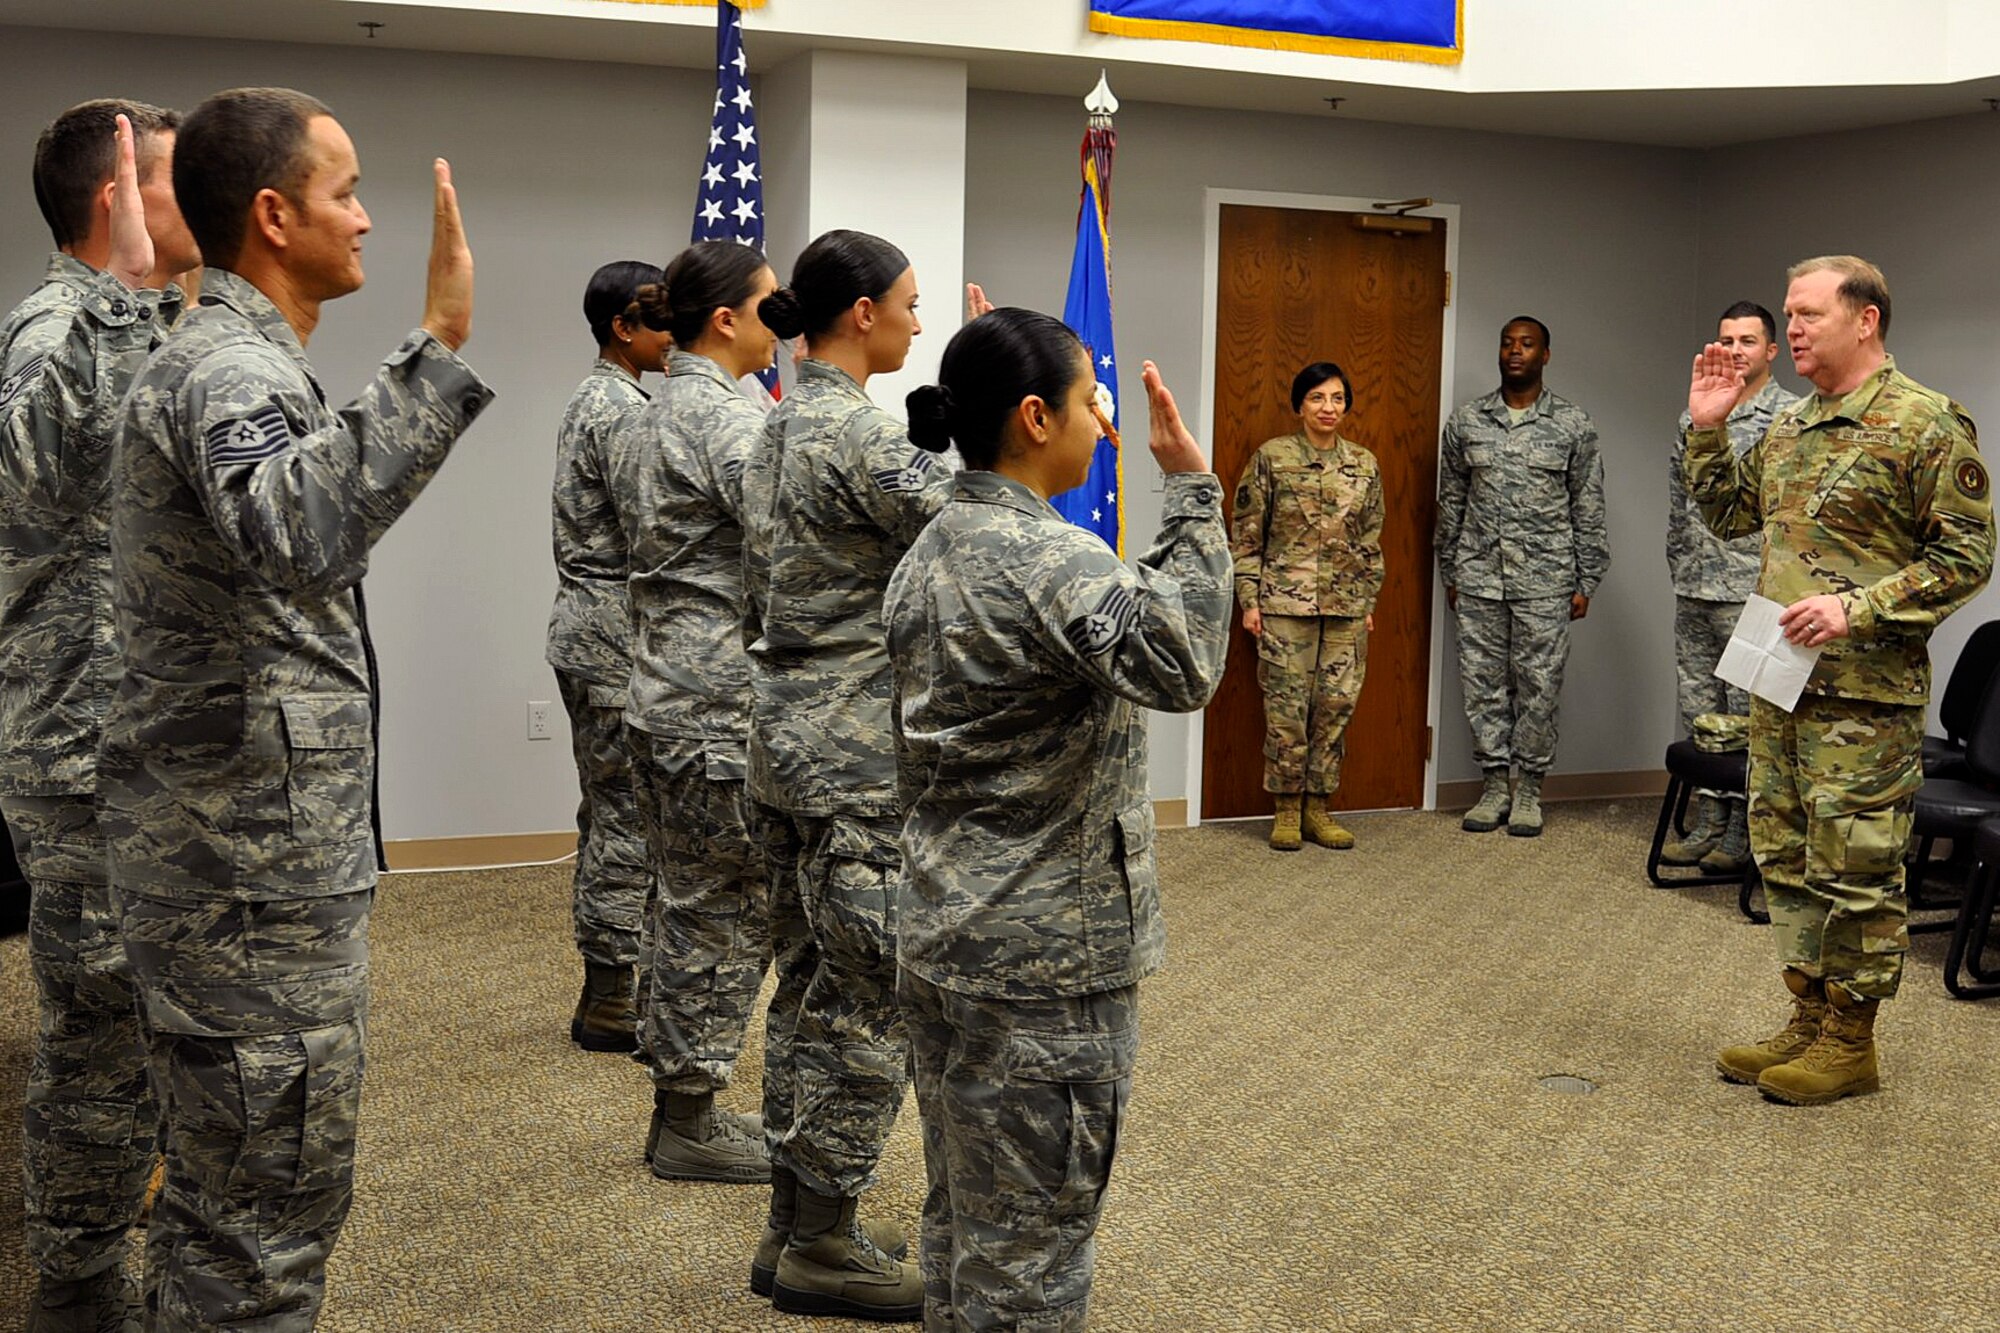 Lt. Gen. Richard W. Scobee, Commander, Air Force Reserve Command, administers the Oath of Enlistment to Airmen attached to the 940th Airlift Wing, Beale Air Force Base, California, for a re-enlistment ceremony during the January Unit Training Assembly of 2019, Beale Air Force Base, California. (Courtesy photo)